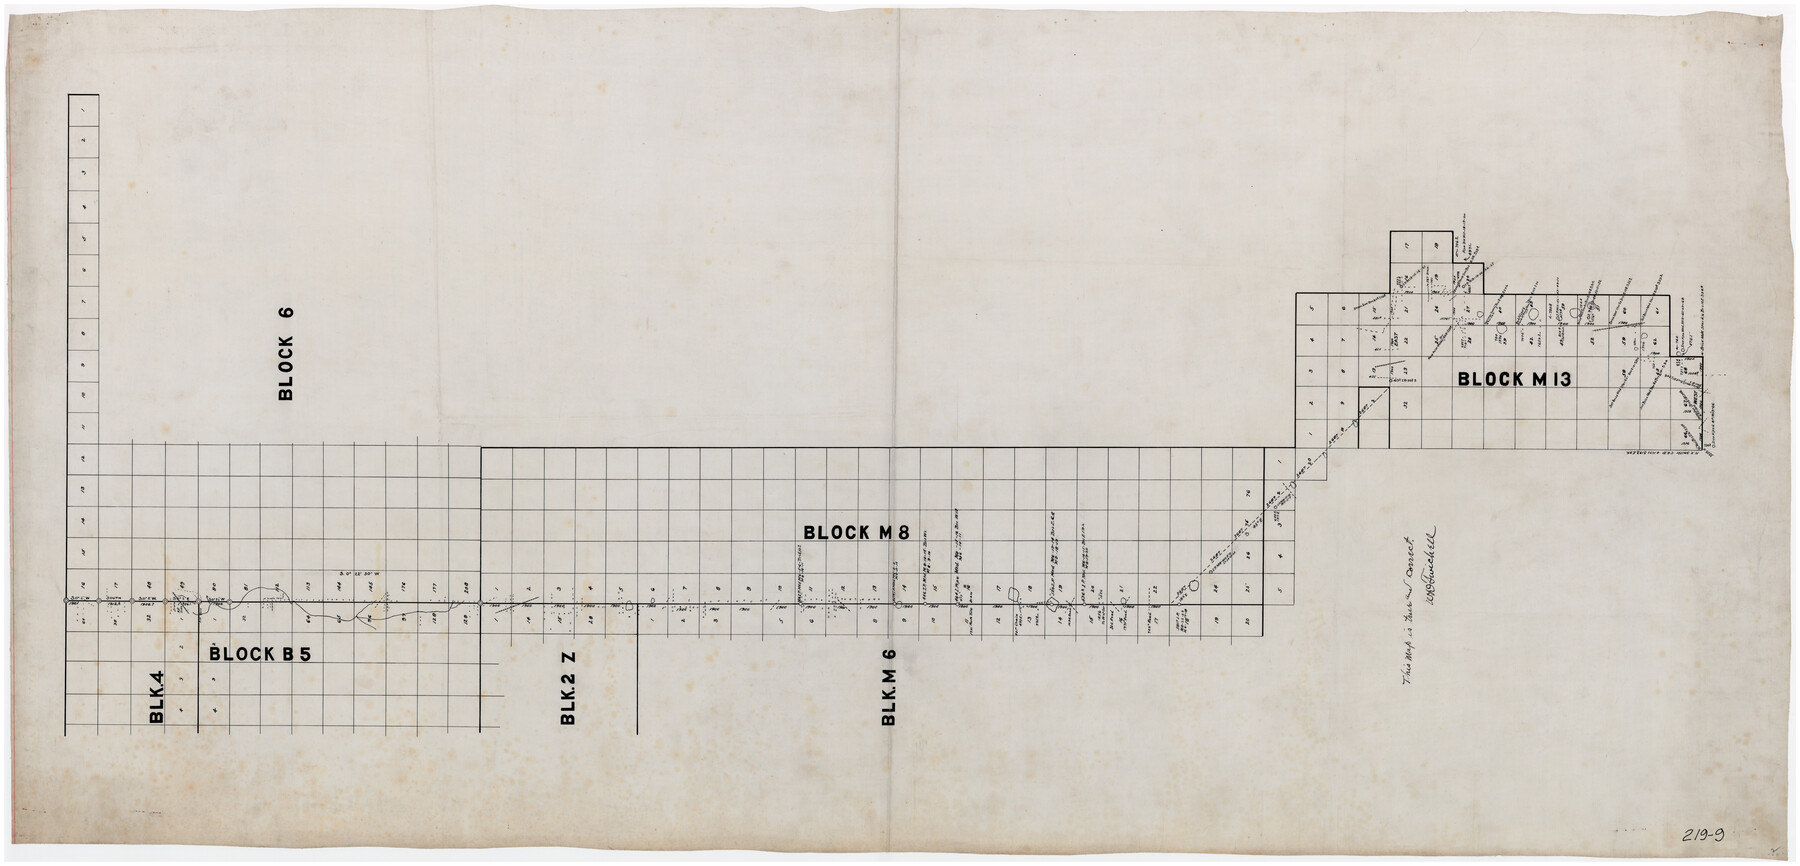 89643, [Sketch of part of Blks. 4, 6, B5, 2Z, M6, M8, and M13], Twichell Survey Records